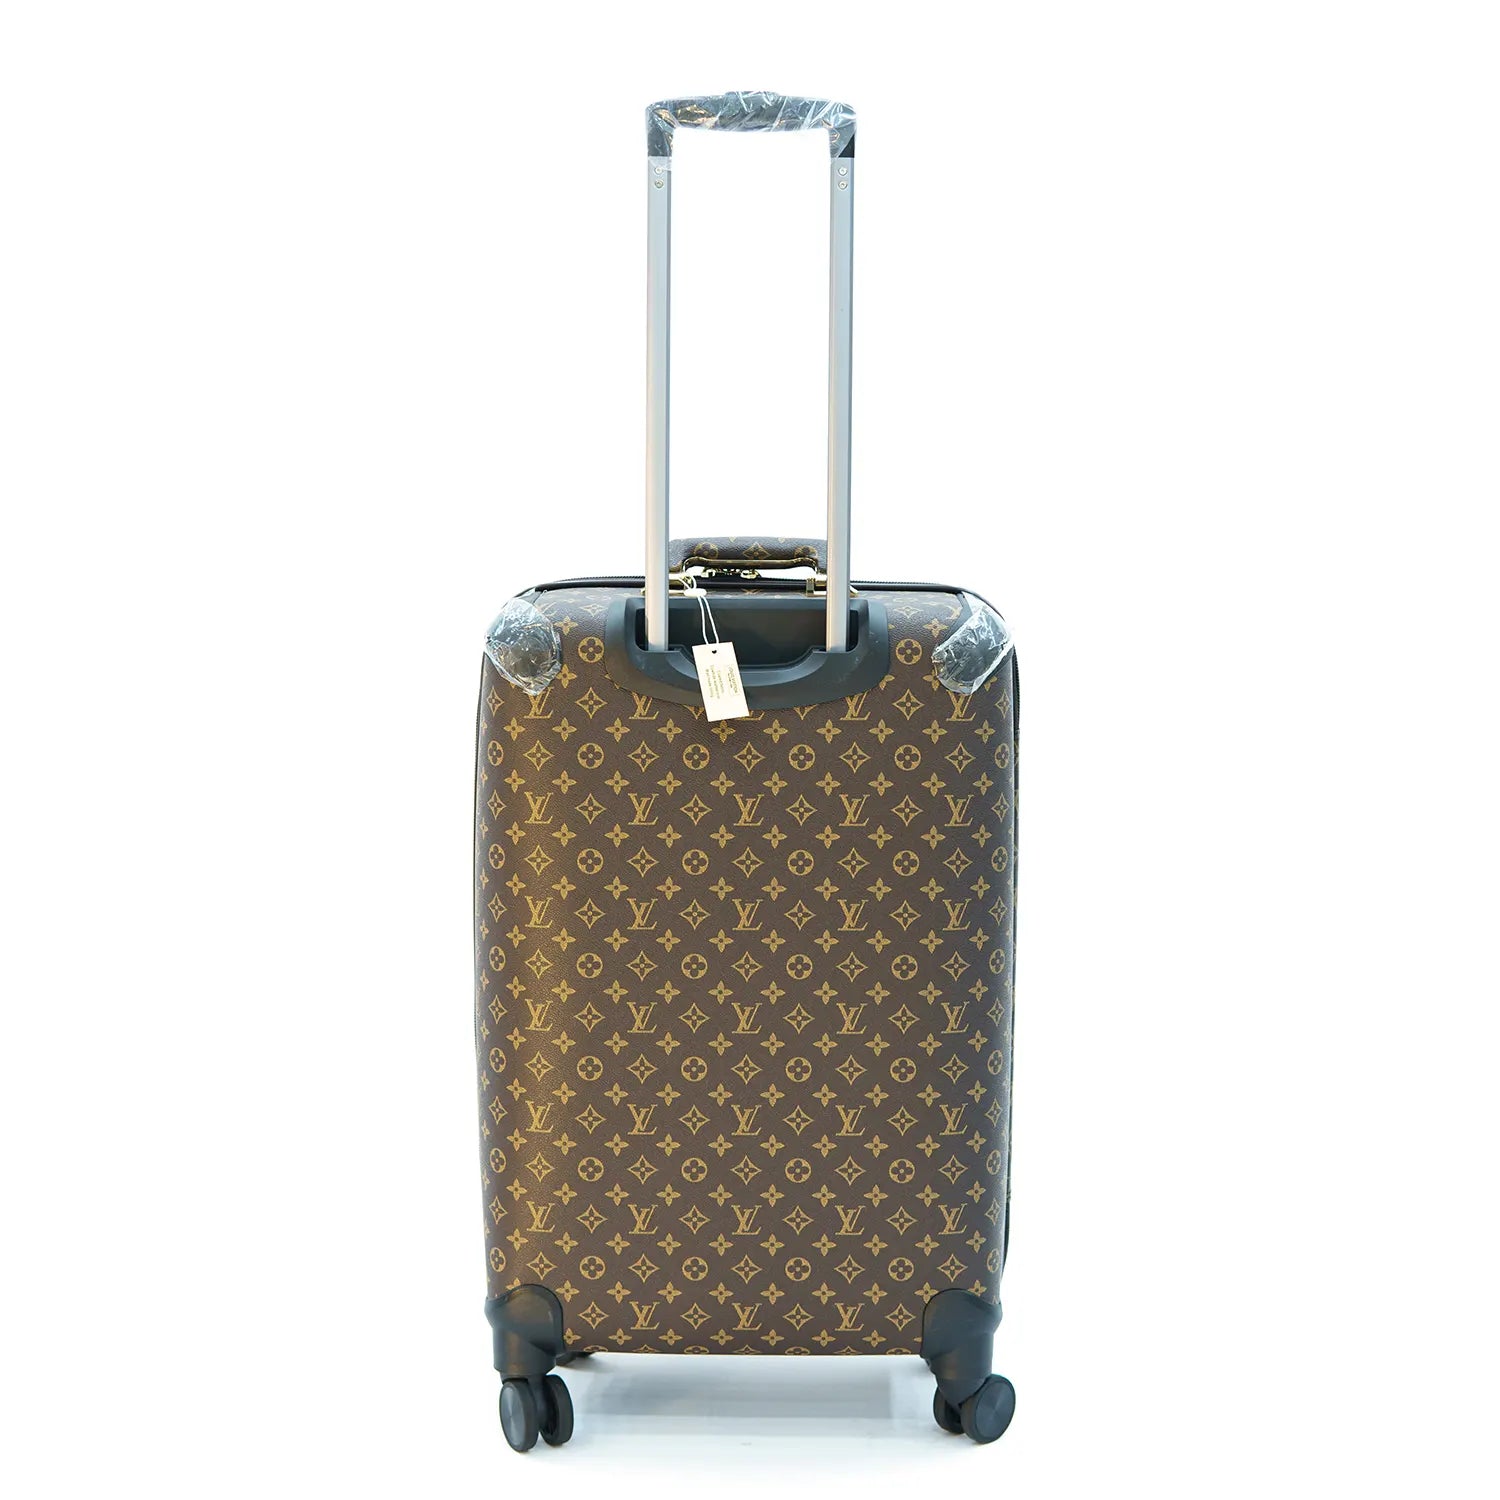 Elite Travel Companion: High-Quality Luggage Briefcase for Unmatched Style